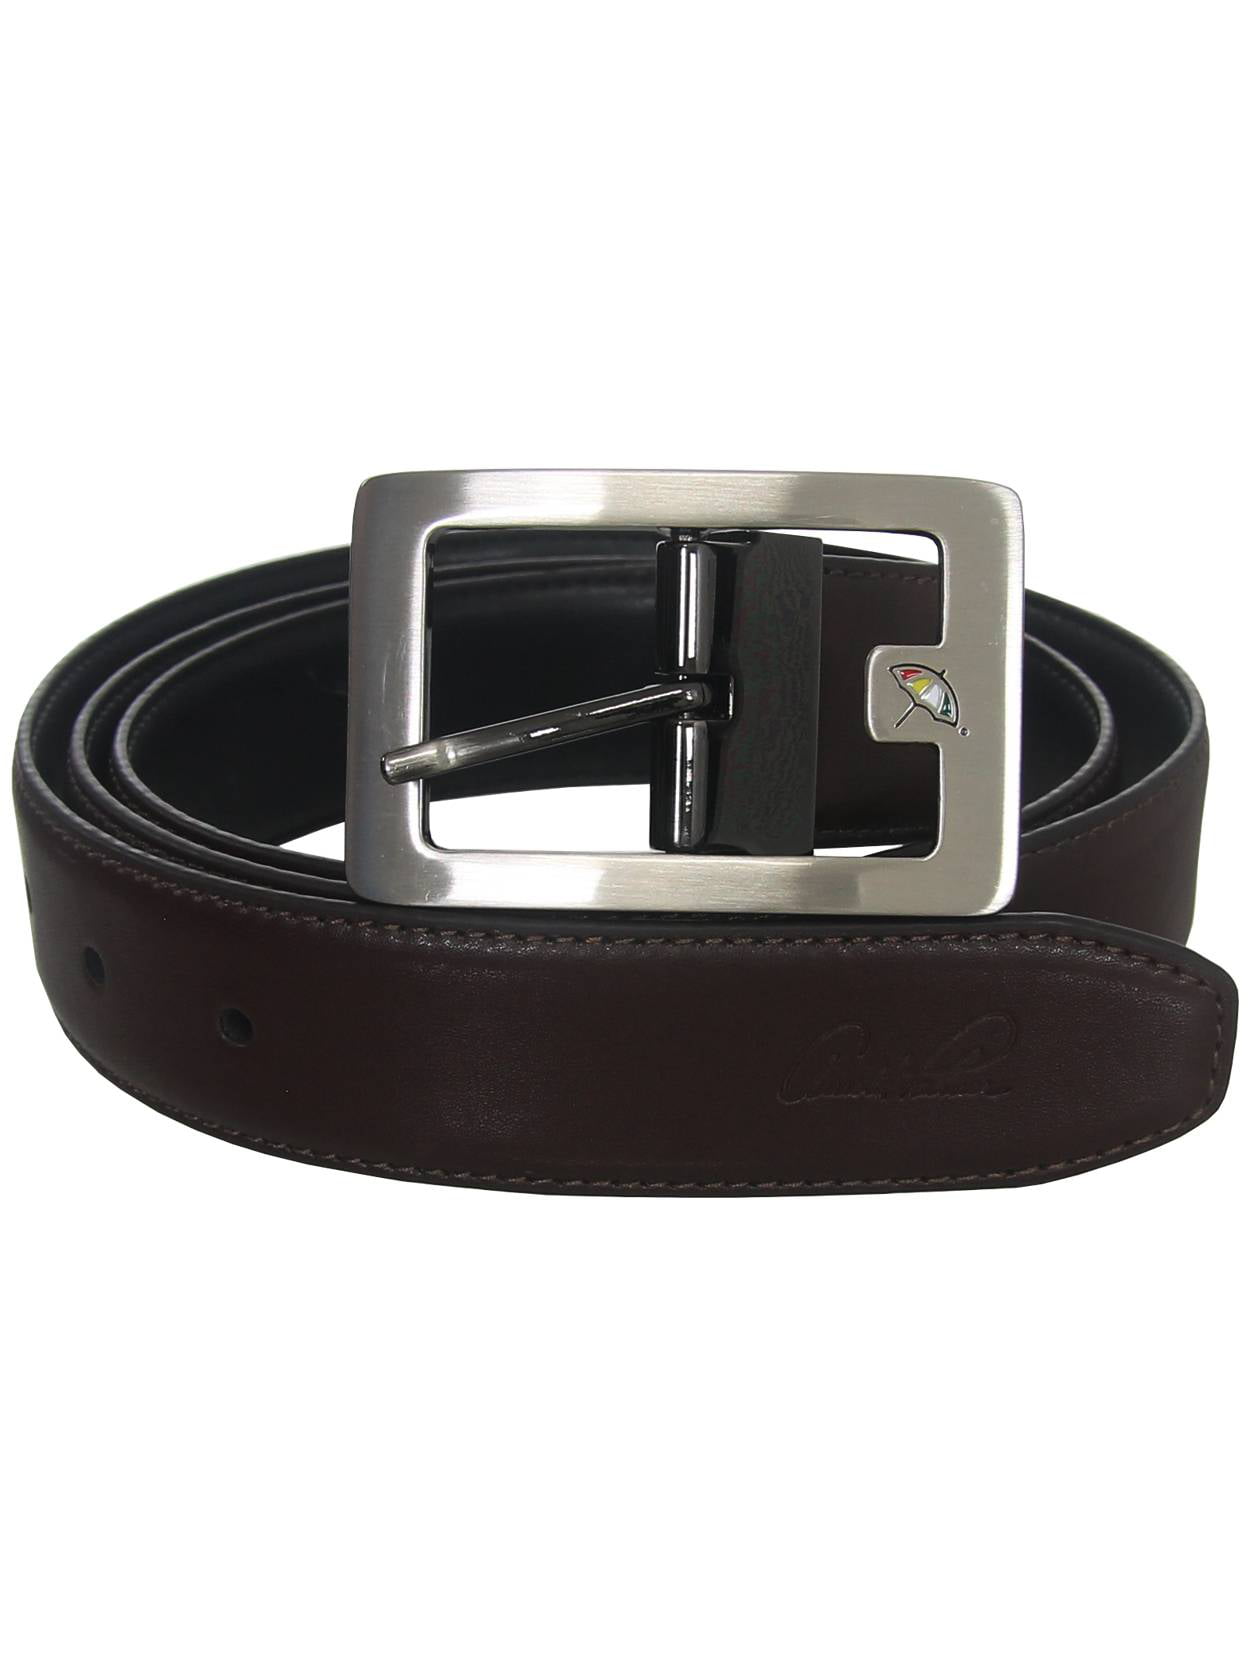 Gents New Metal Black and Brown Loop Milano Leather Buck Belt High Quality M2920